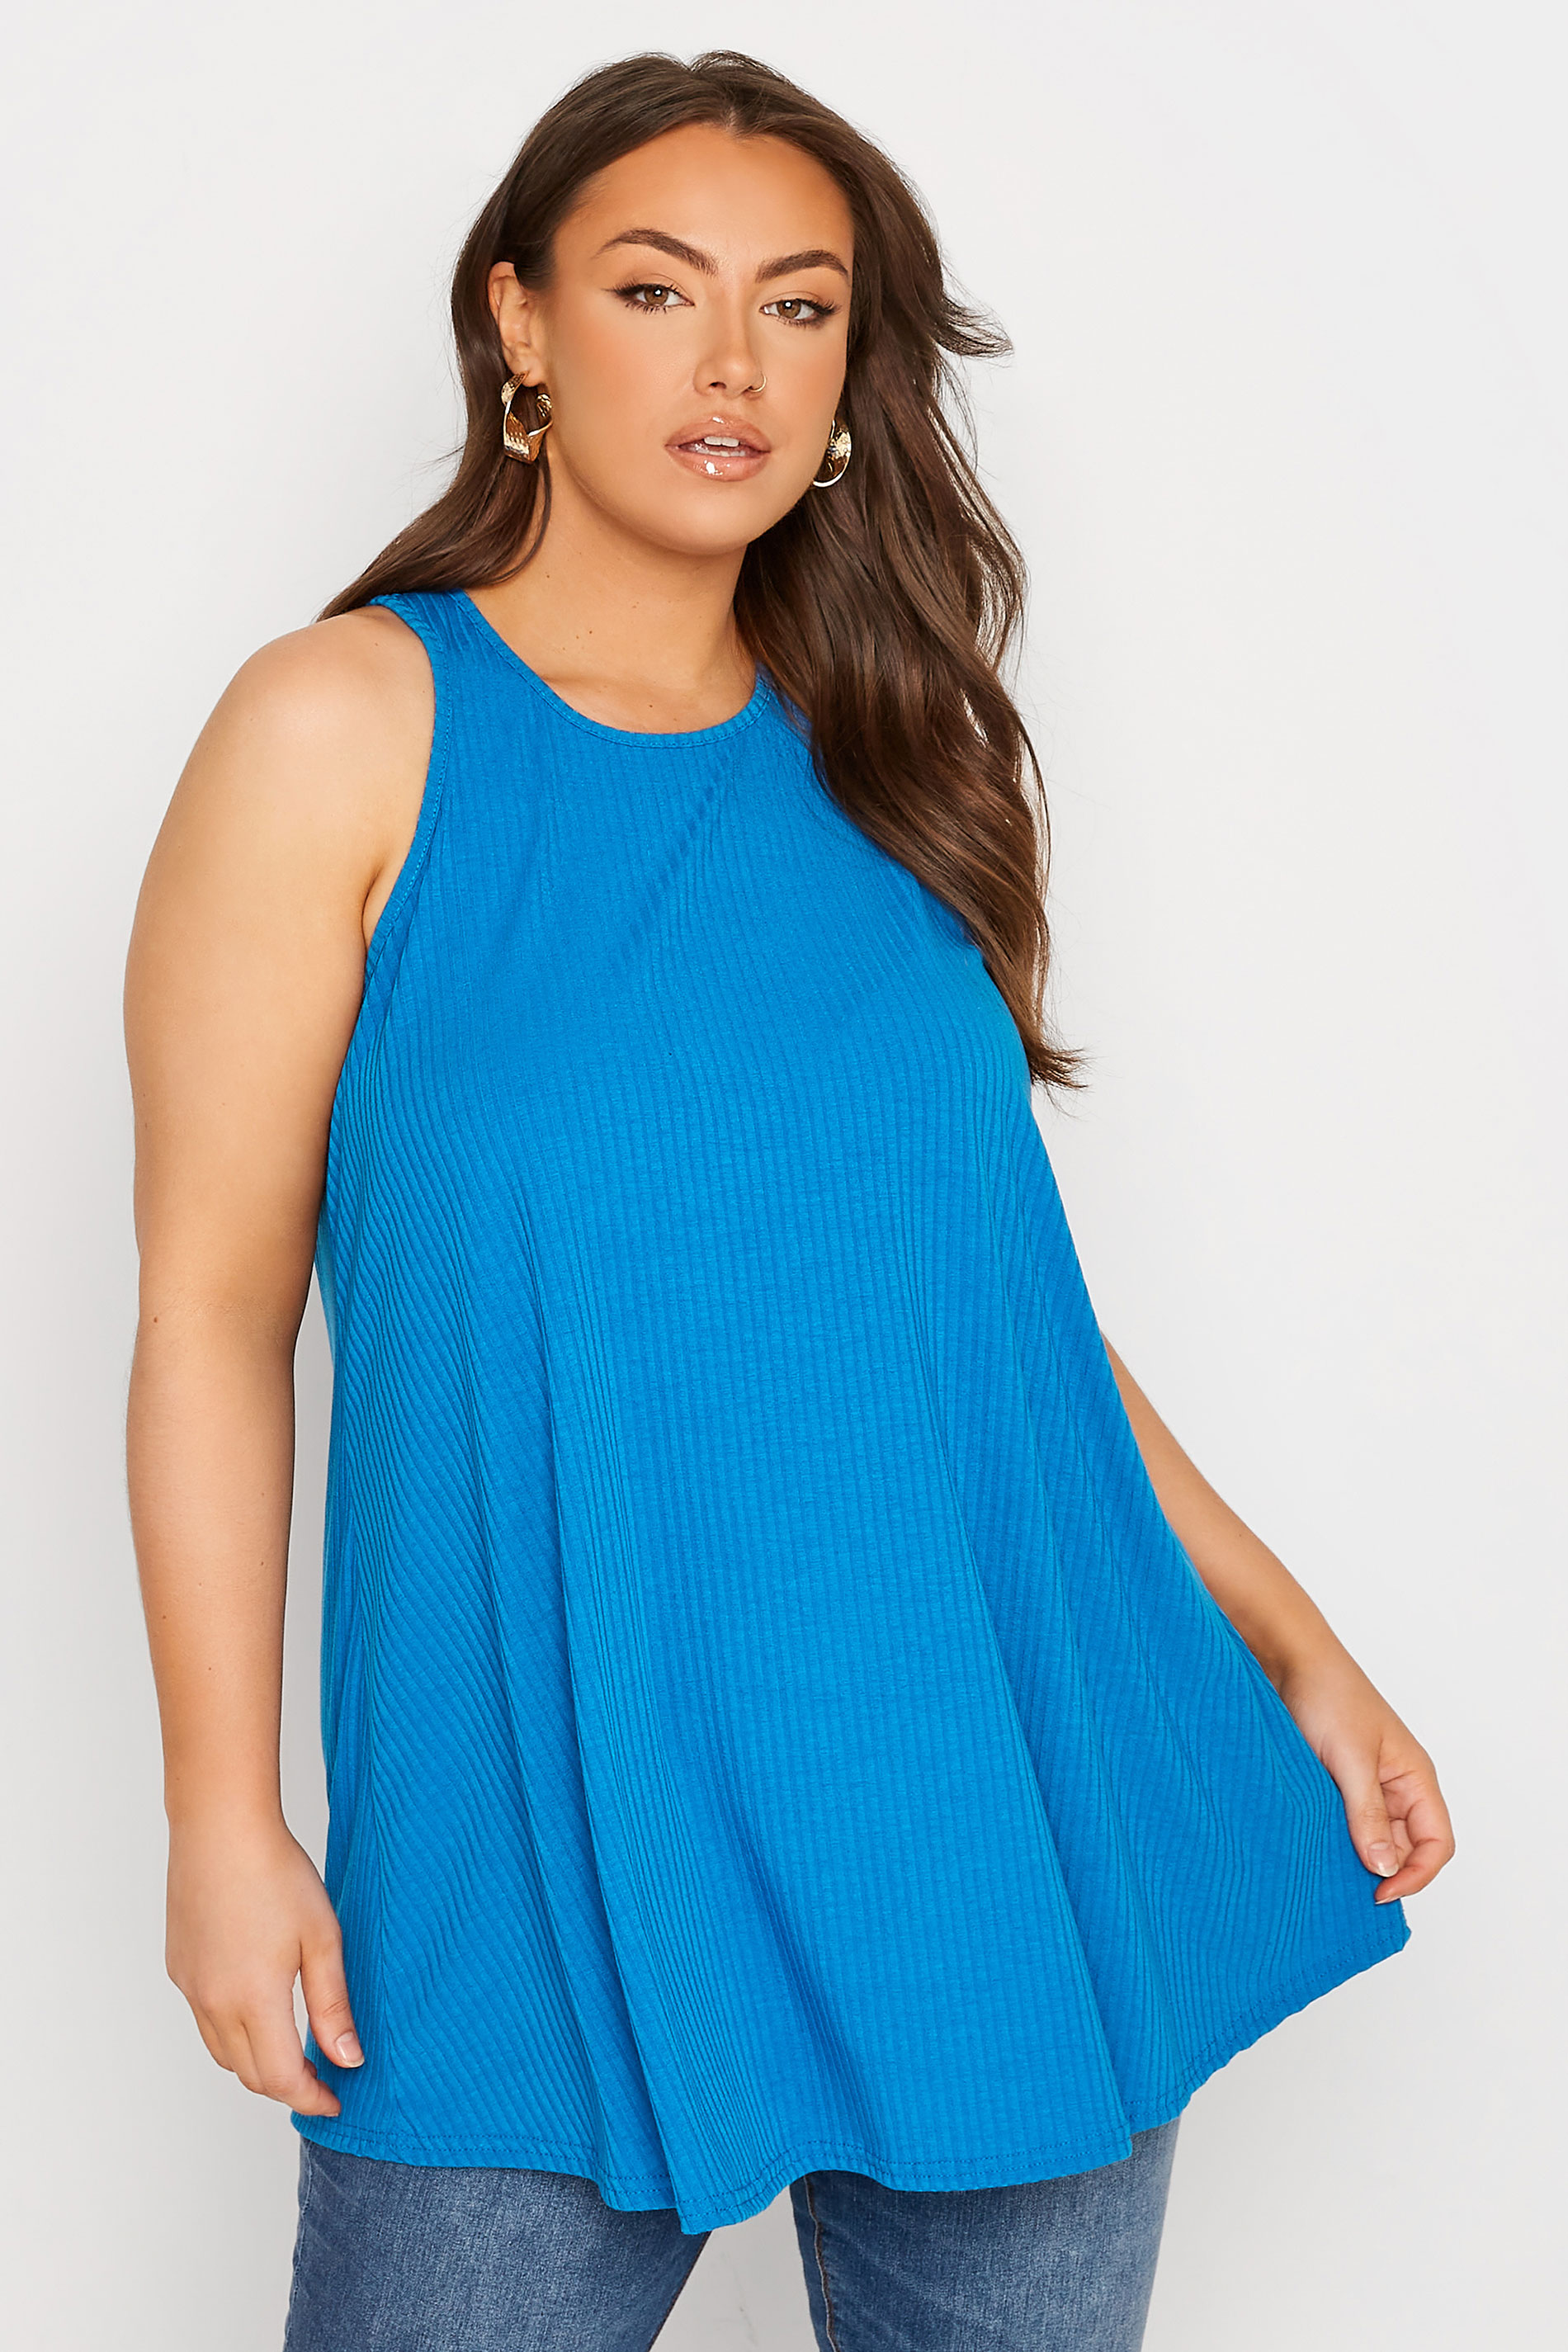 LIMITED COLLECTION Plus Size Cobalt Blue Racer Back Swing Vest Top | Yours Clothing 1